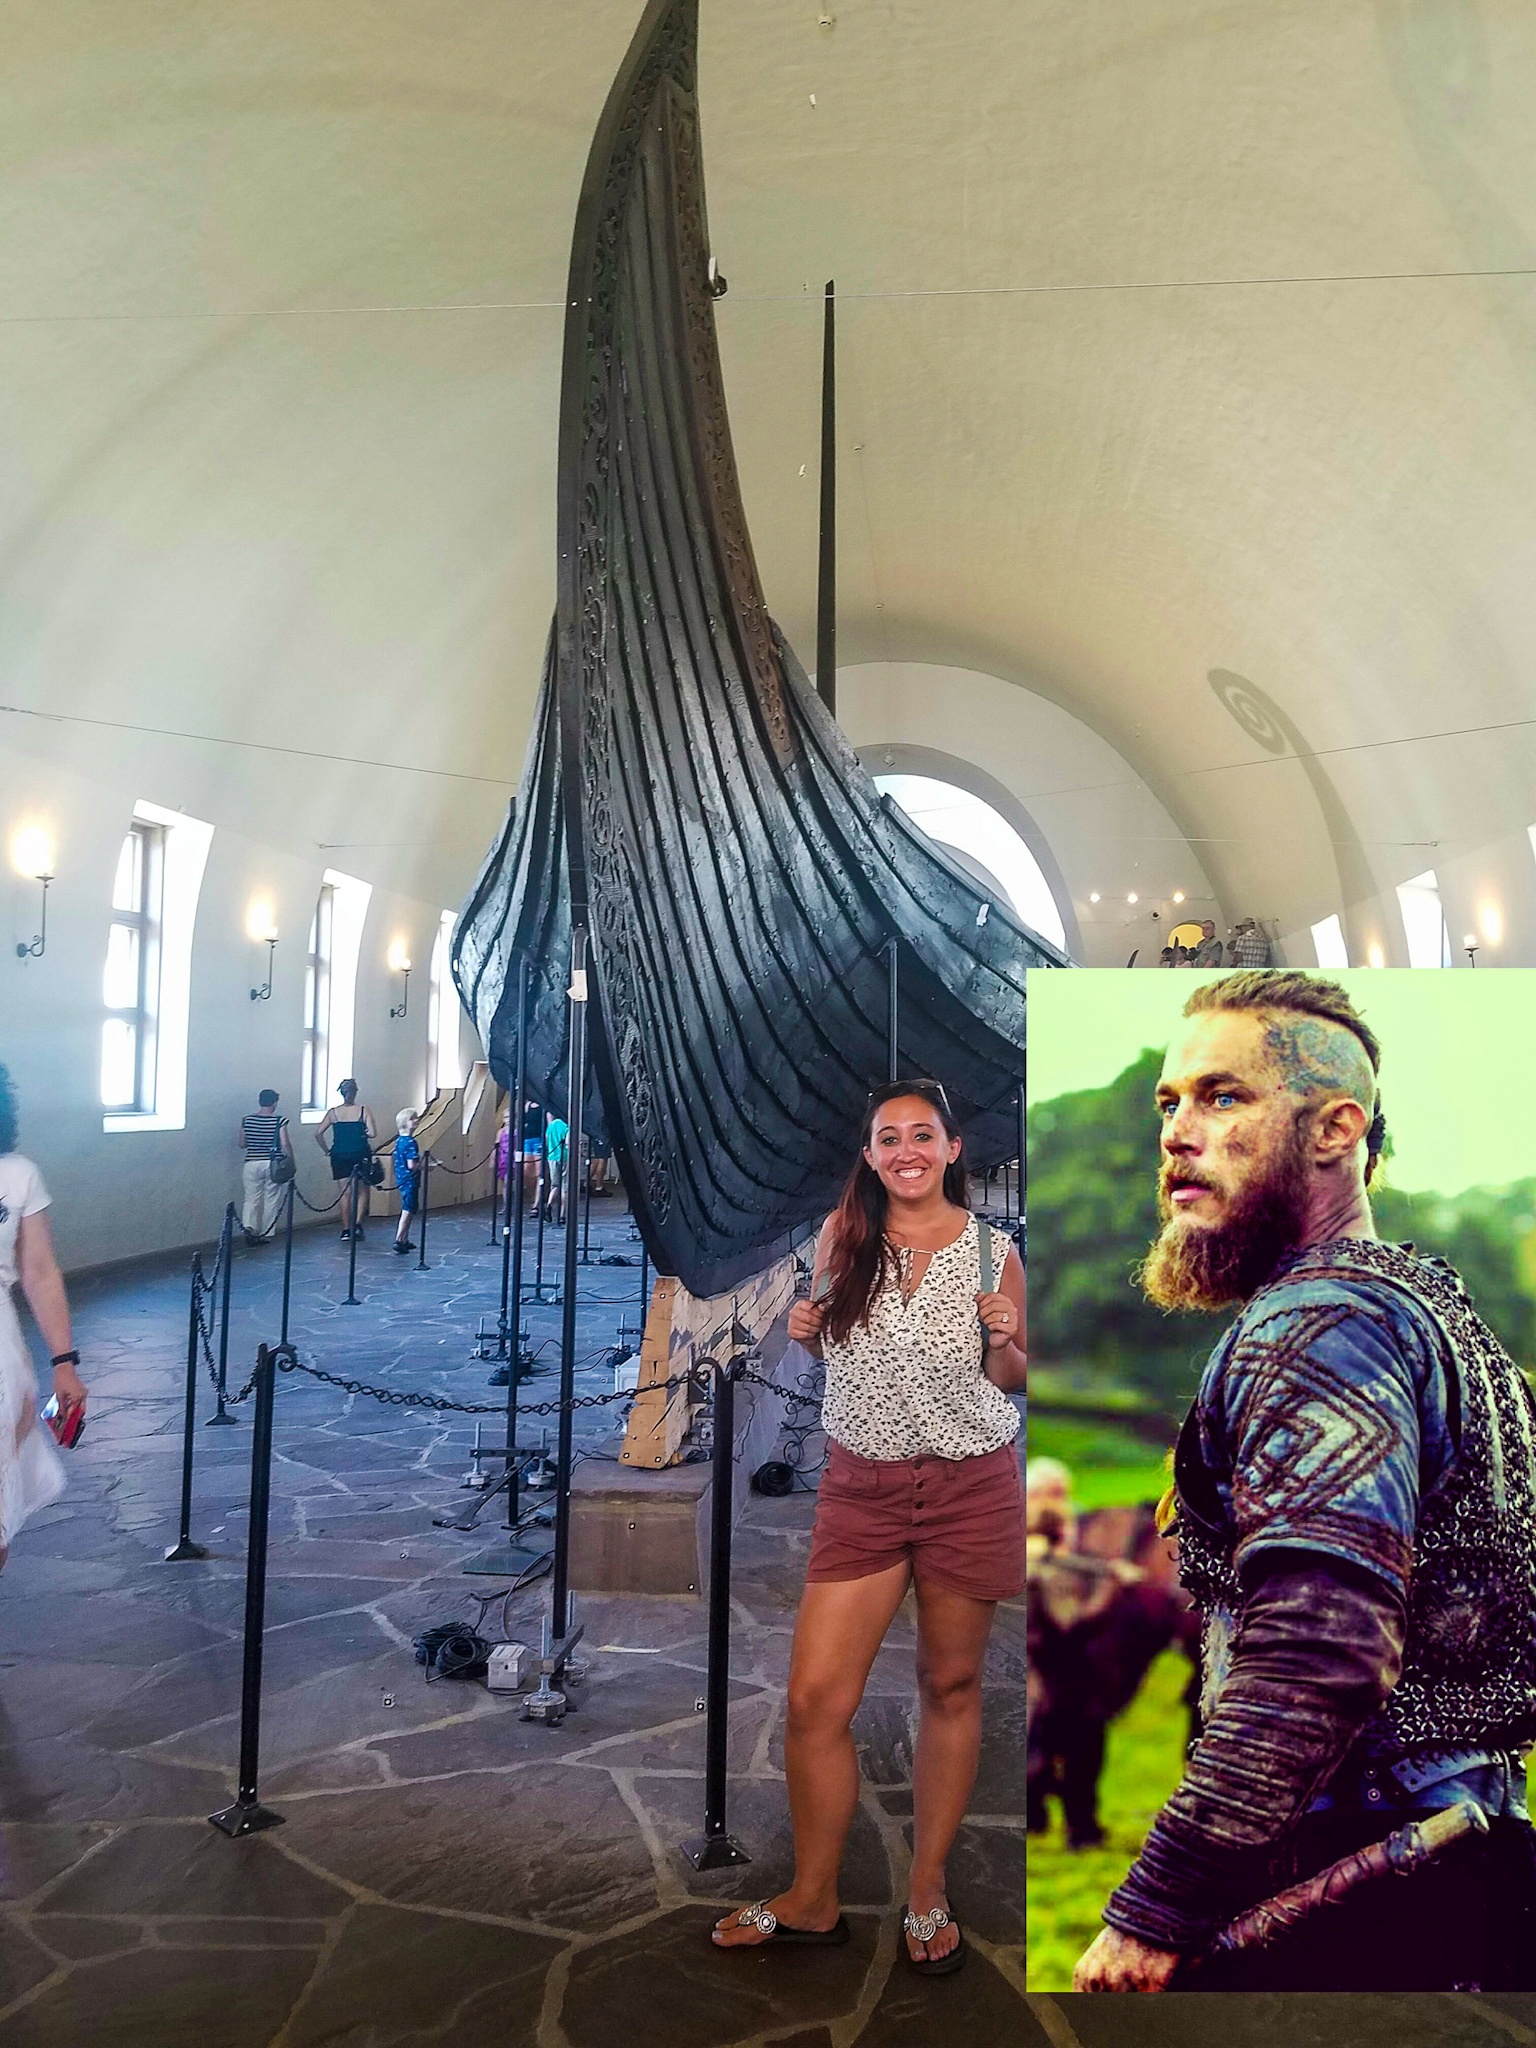 A woman poses next to an excavated Viking ship in a museum in Oslo, next to a photo of a character from the Vikings TV show